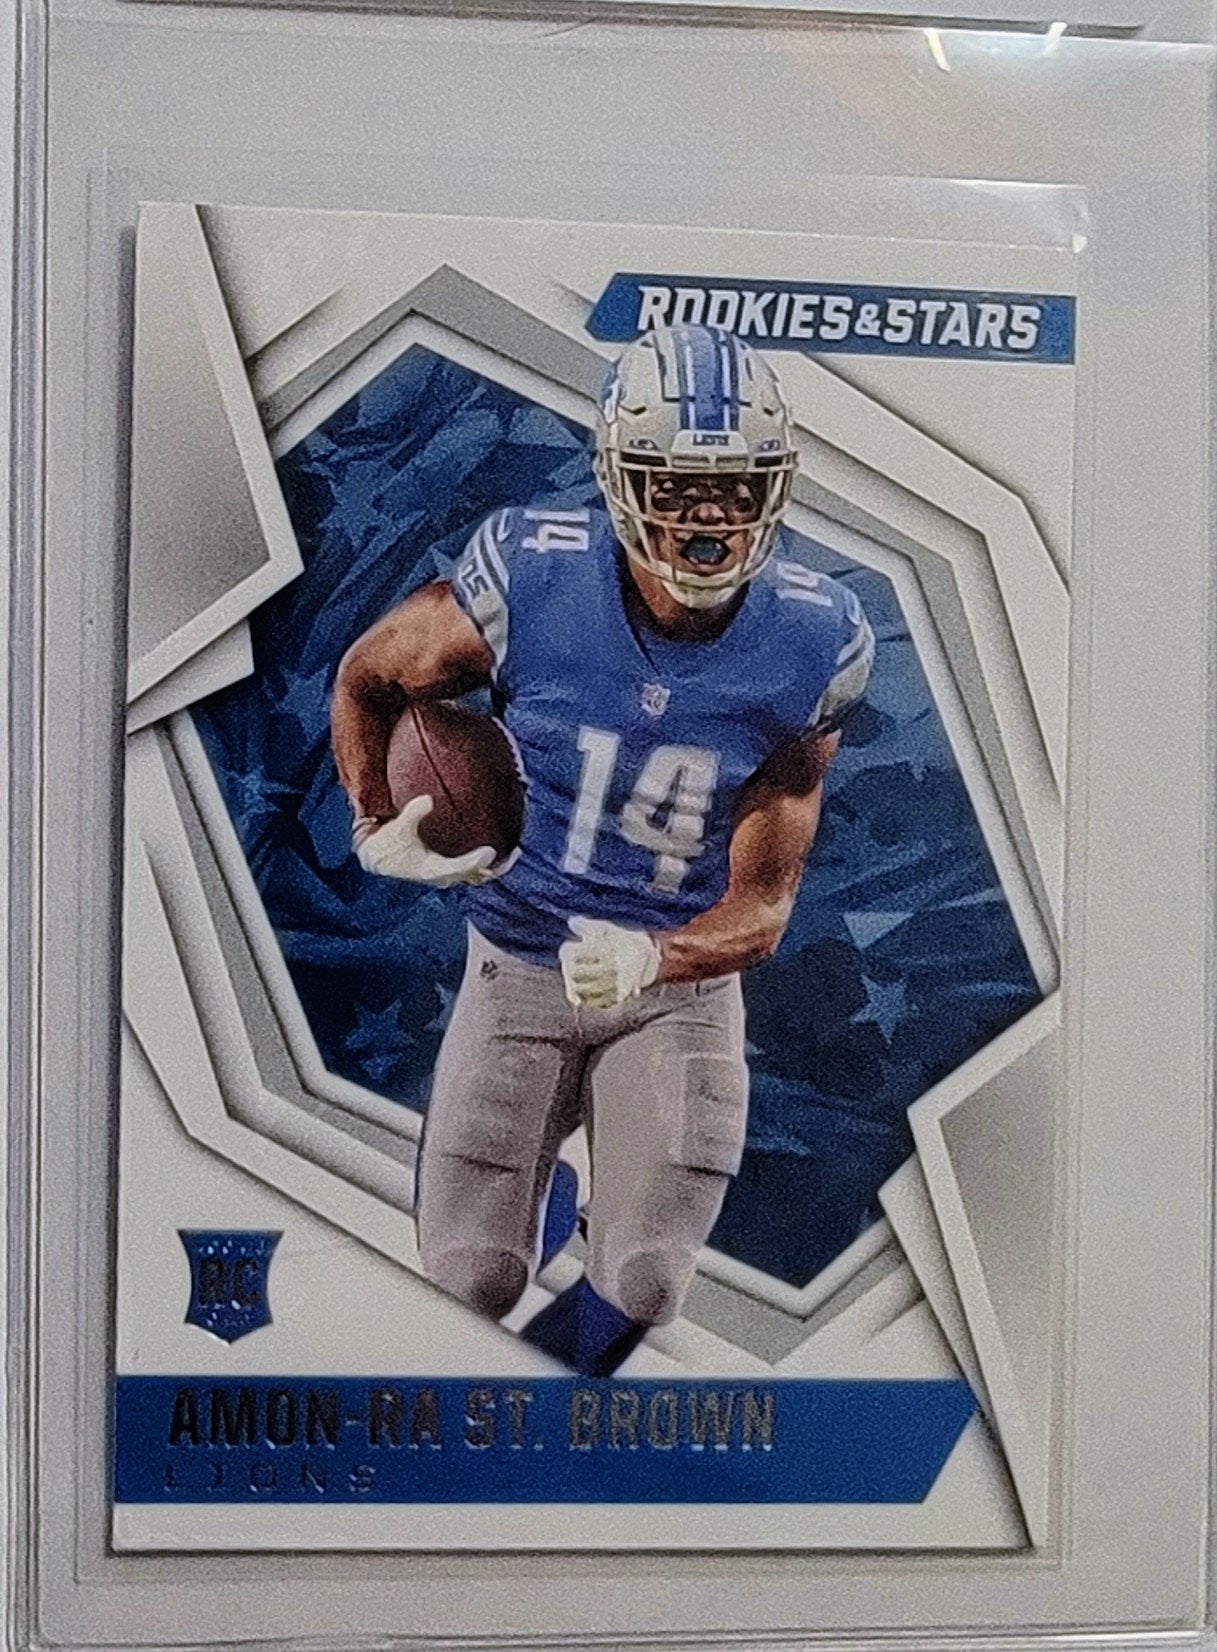 2021 Panini Rookies and Stars Aman Ra St. Brown Rookie Football Card AVM1 simple Xclusive Collectibles   